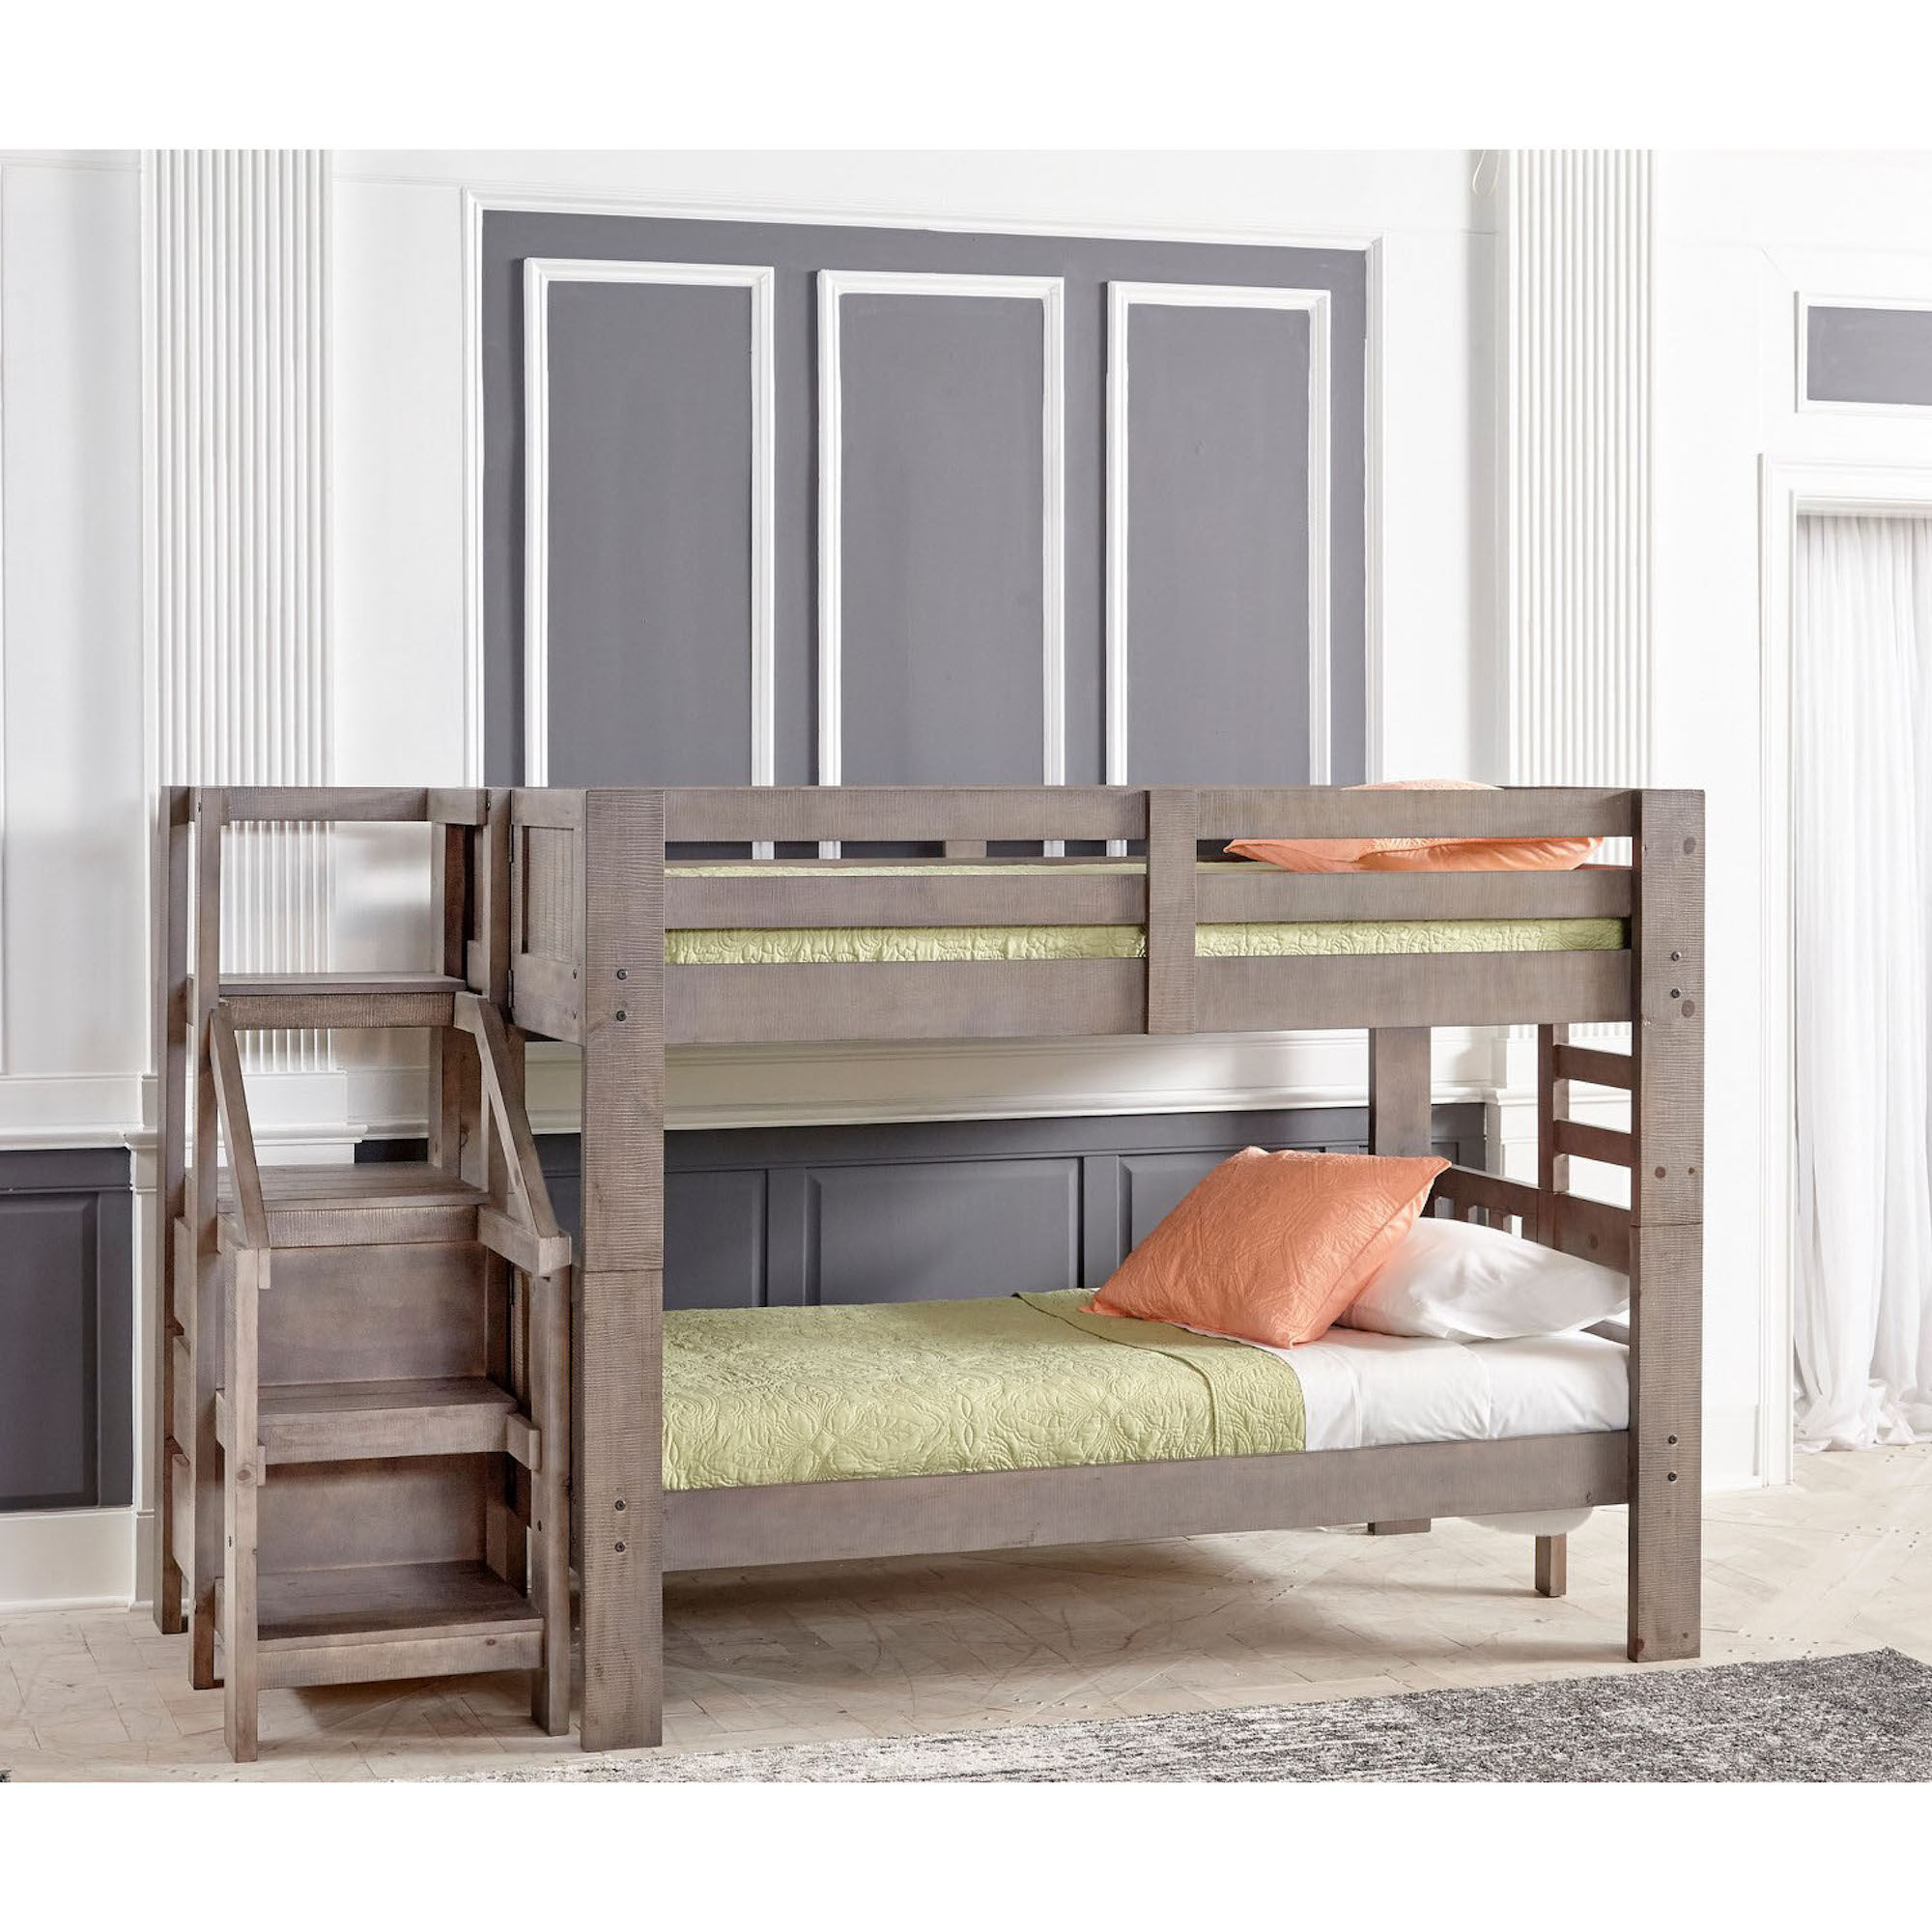 bunk beds for less